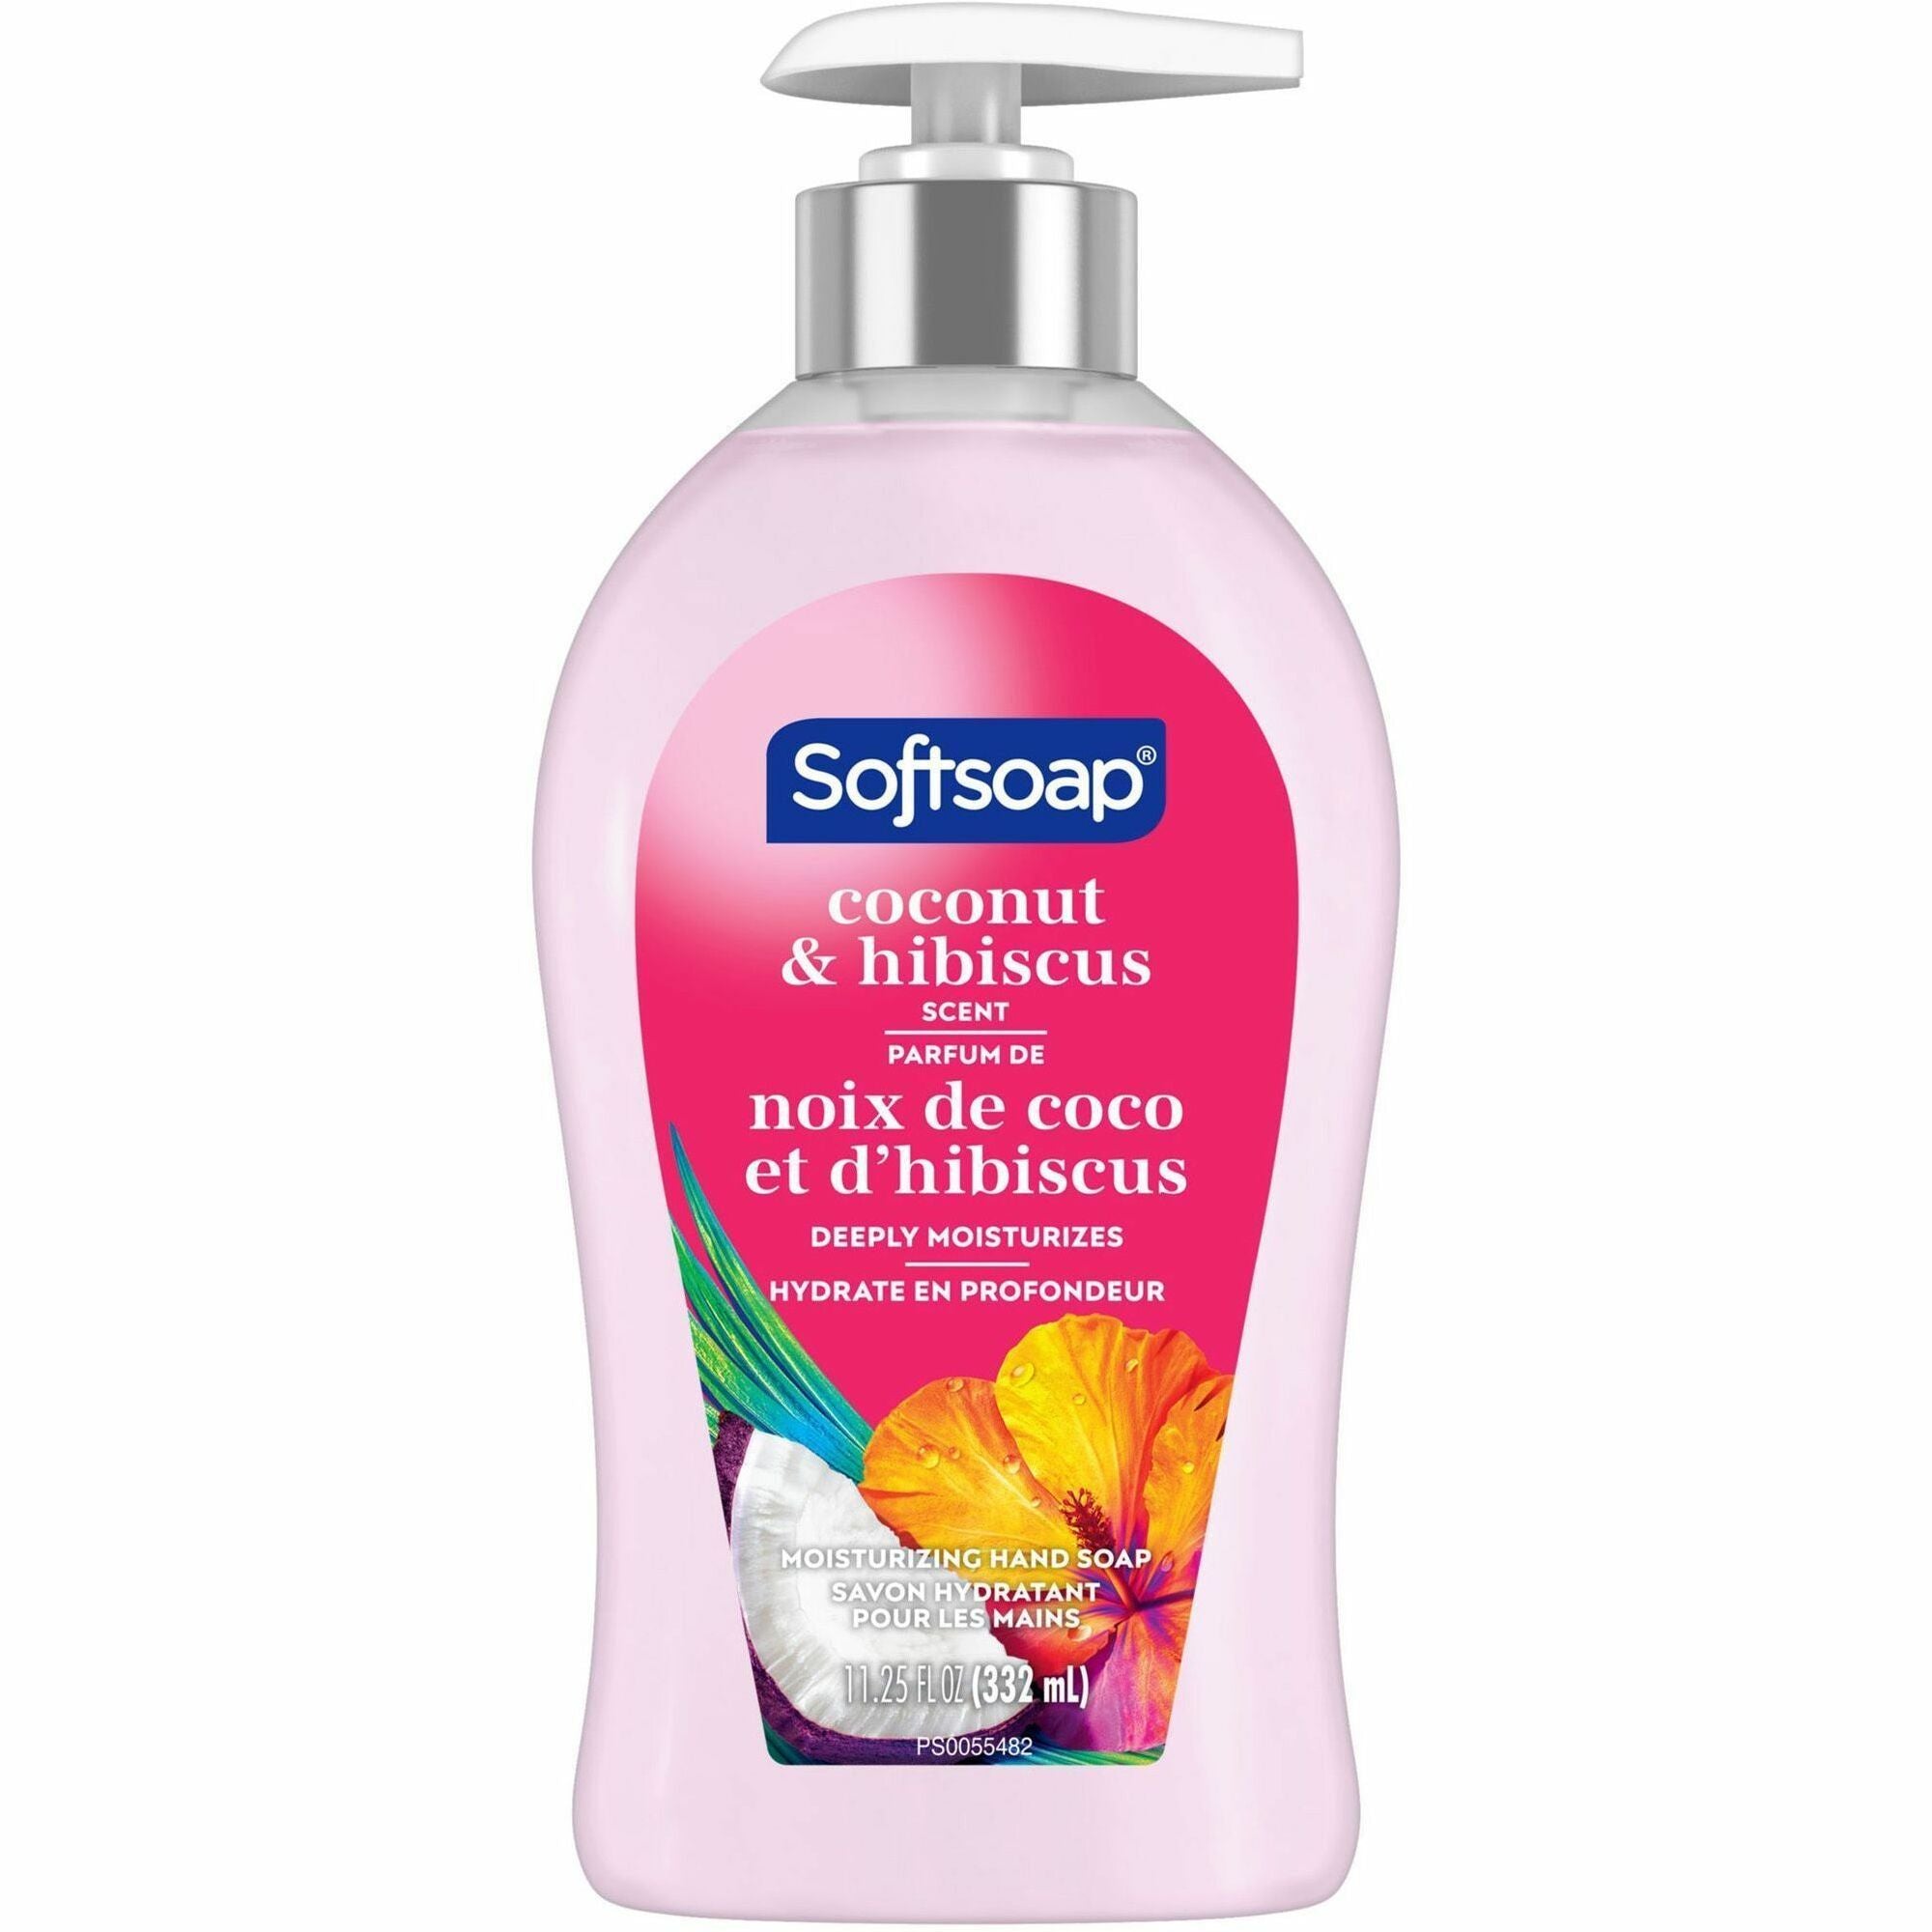 softsoap-coconut-hand-soap-coconut-&-hibiscus-scentfor-113-fl-oz-3327-ml-pump-bottle-dispenser-bacteria-remover-dirt-remover-hand-skin-moisturizing-refillable-recyclable-paraben-free-phthalate-free-biodegradable-1-each_cpcus07157a - 1